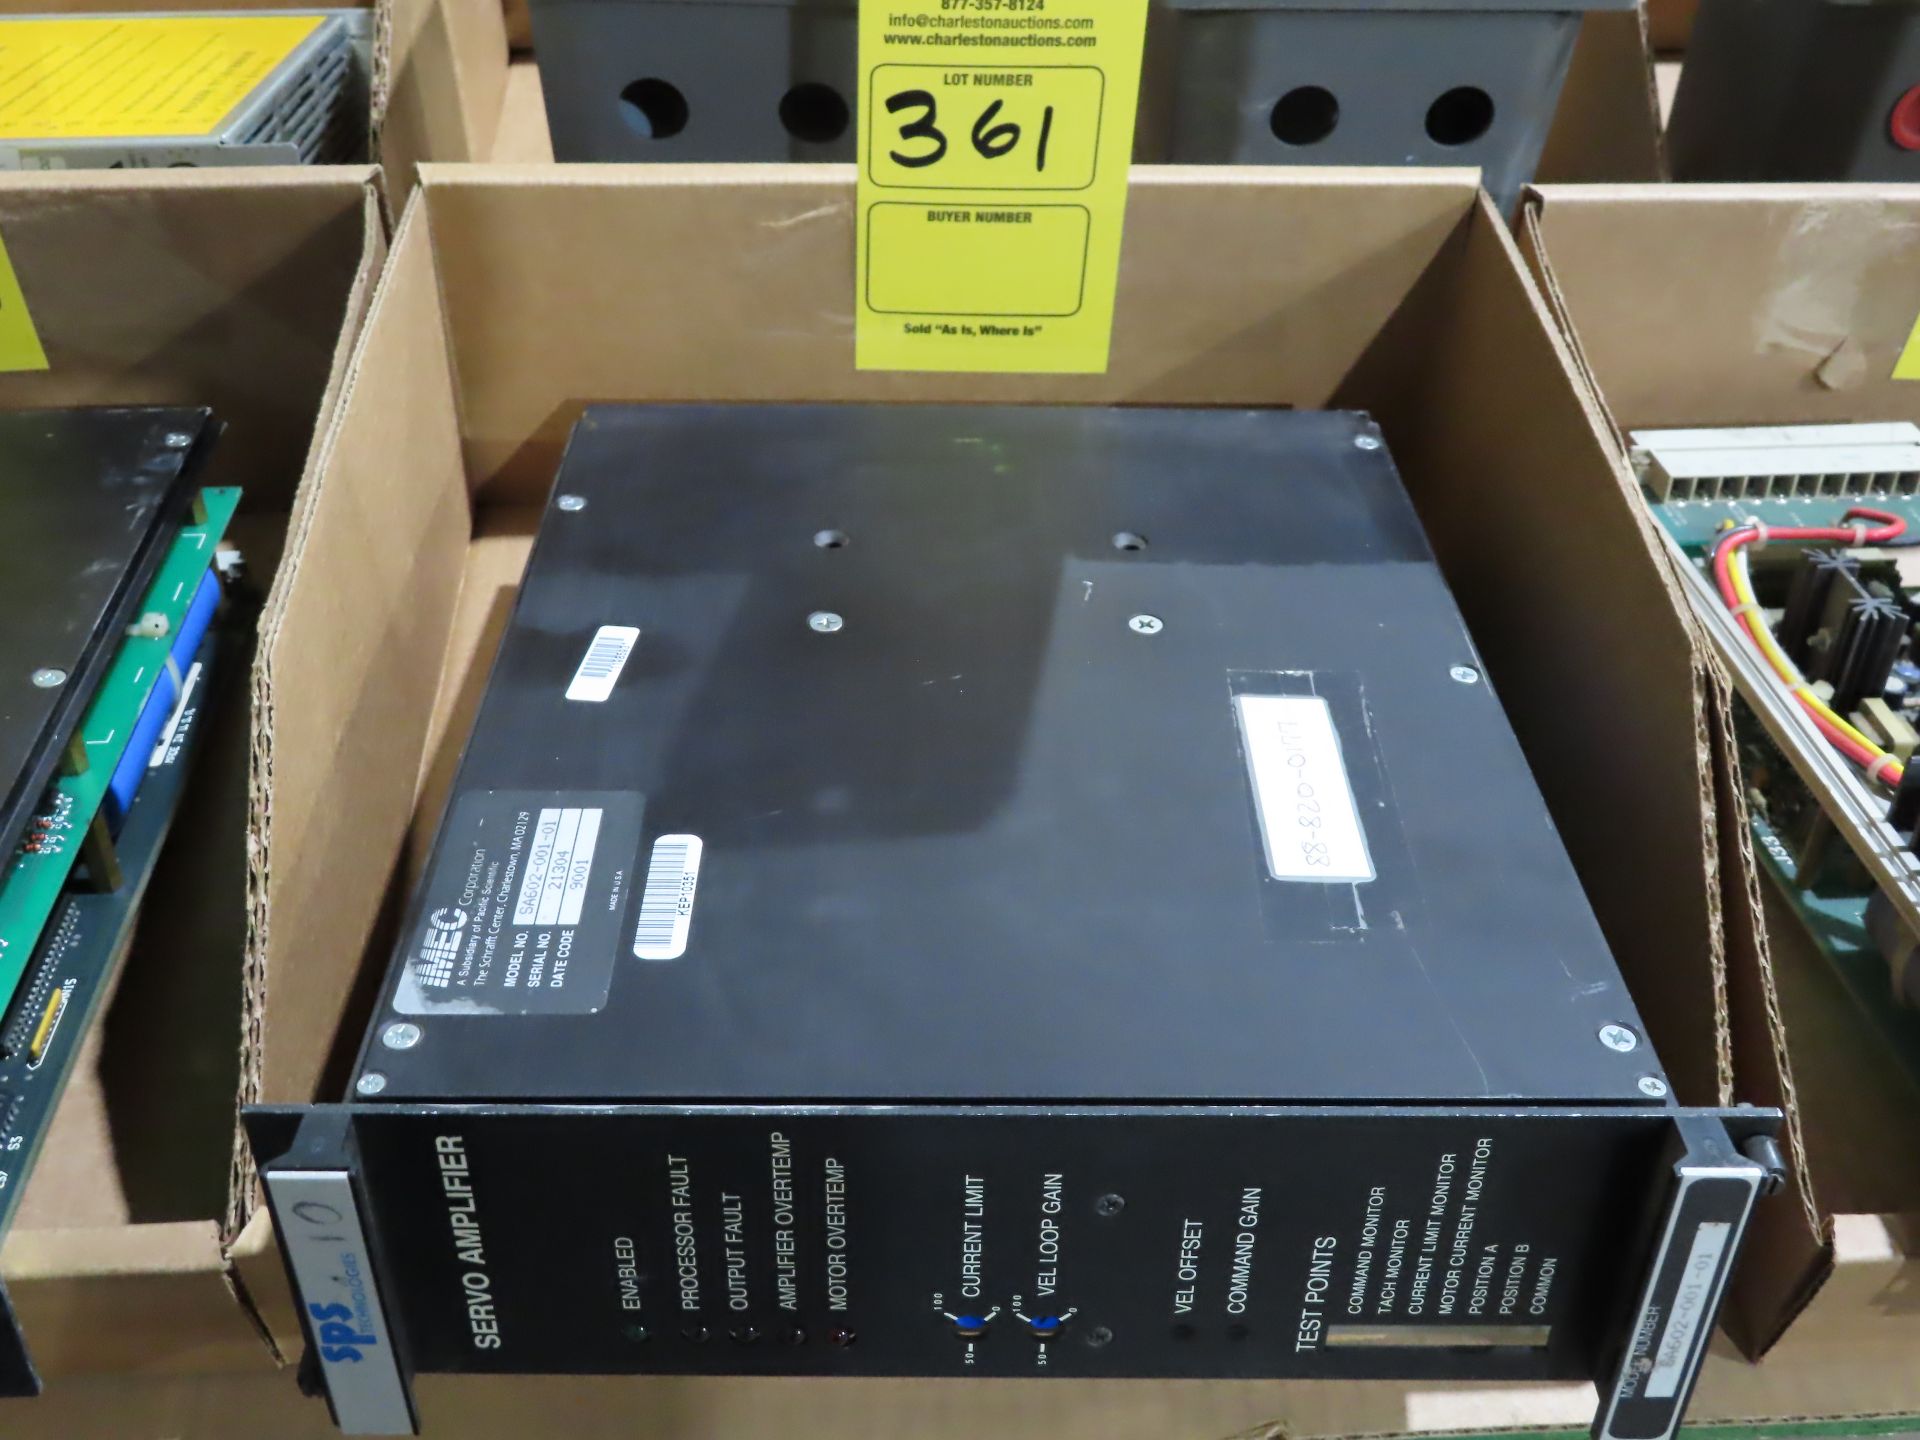 Pacific Scientific model SA602-001-01 servo amplifier, as always, with Brolyn LLC auctions, all lots